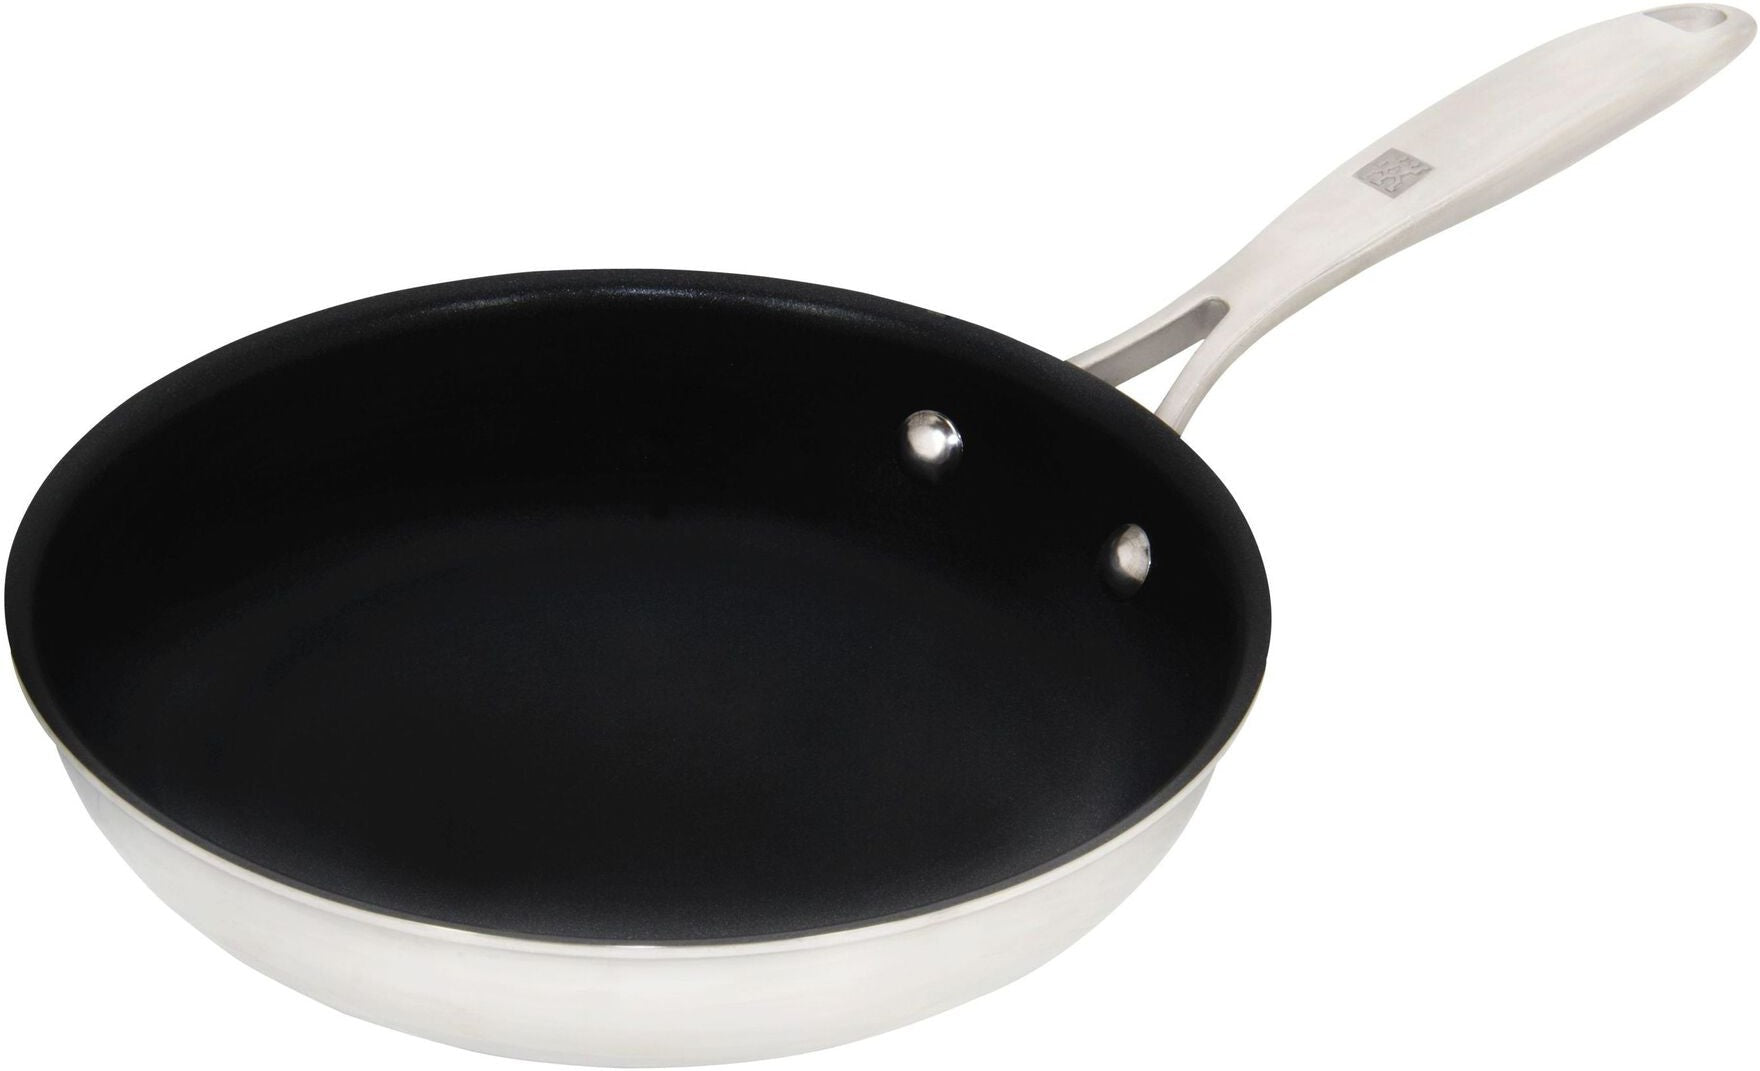 Zwilling - Sol II 11" Non-Stick Fry Pan - 66129-282